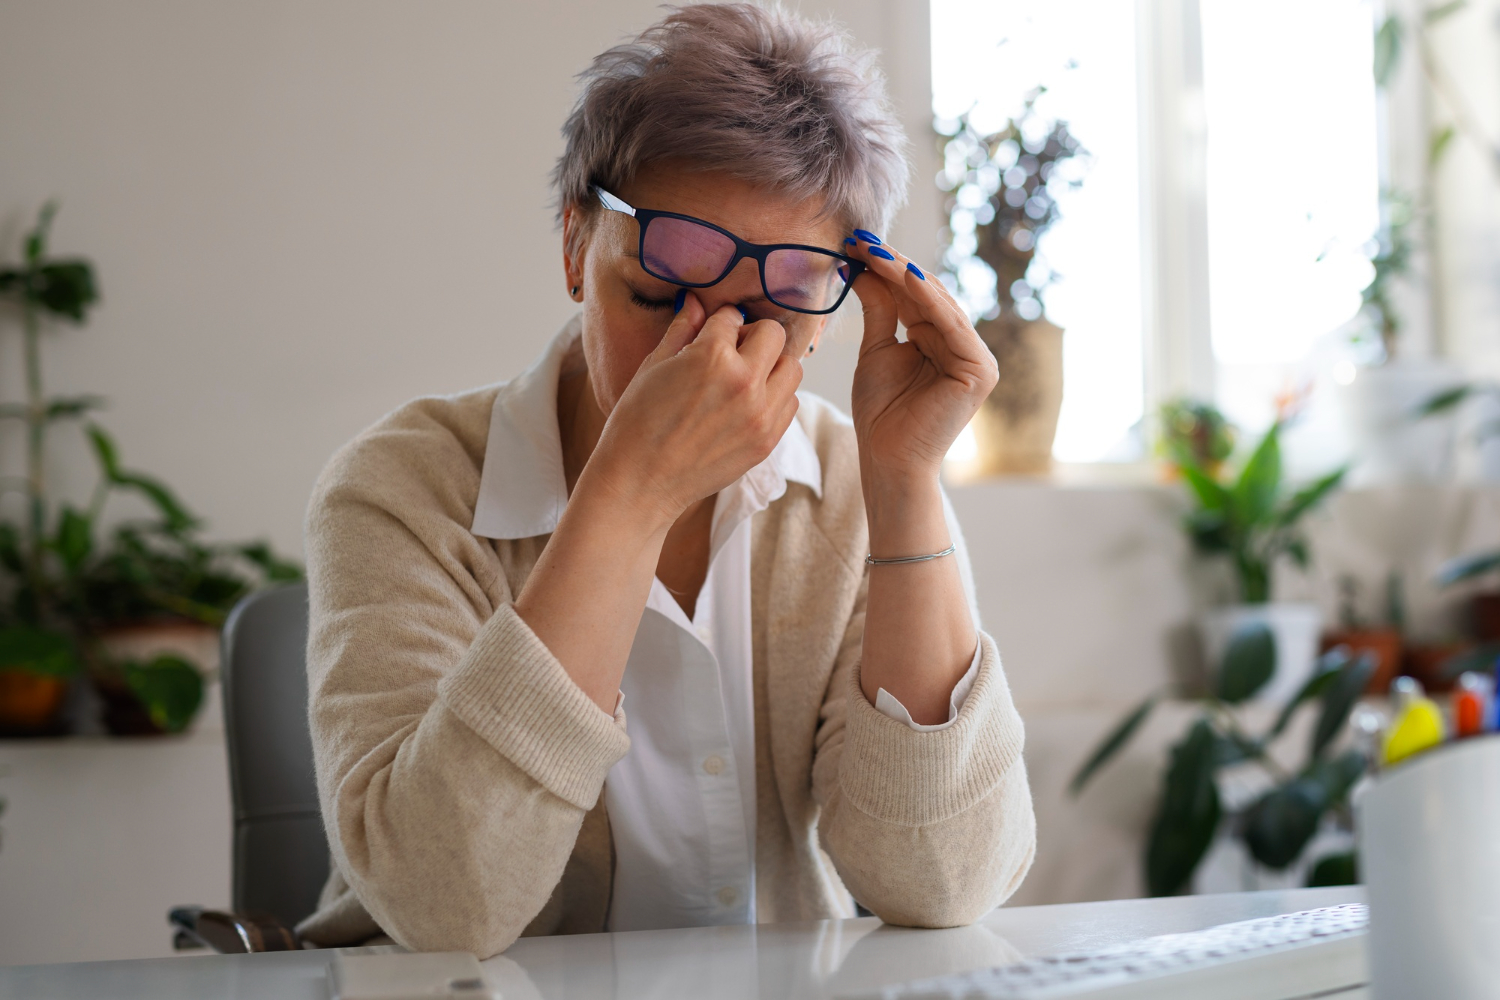 Understanding Discomfort with New Eyeglasses: Causes and Solutions